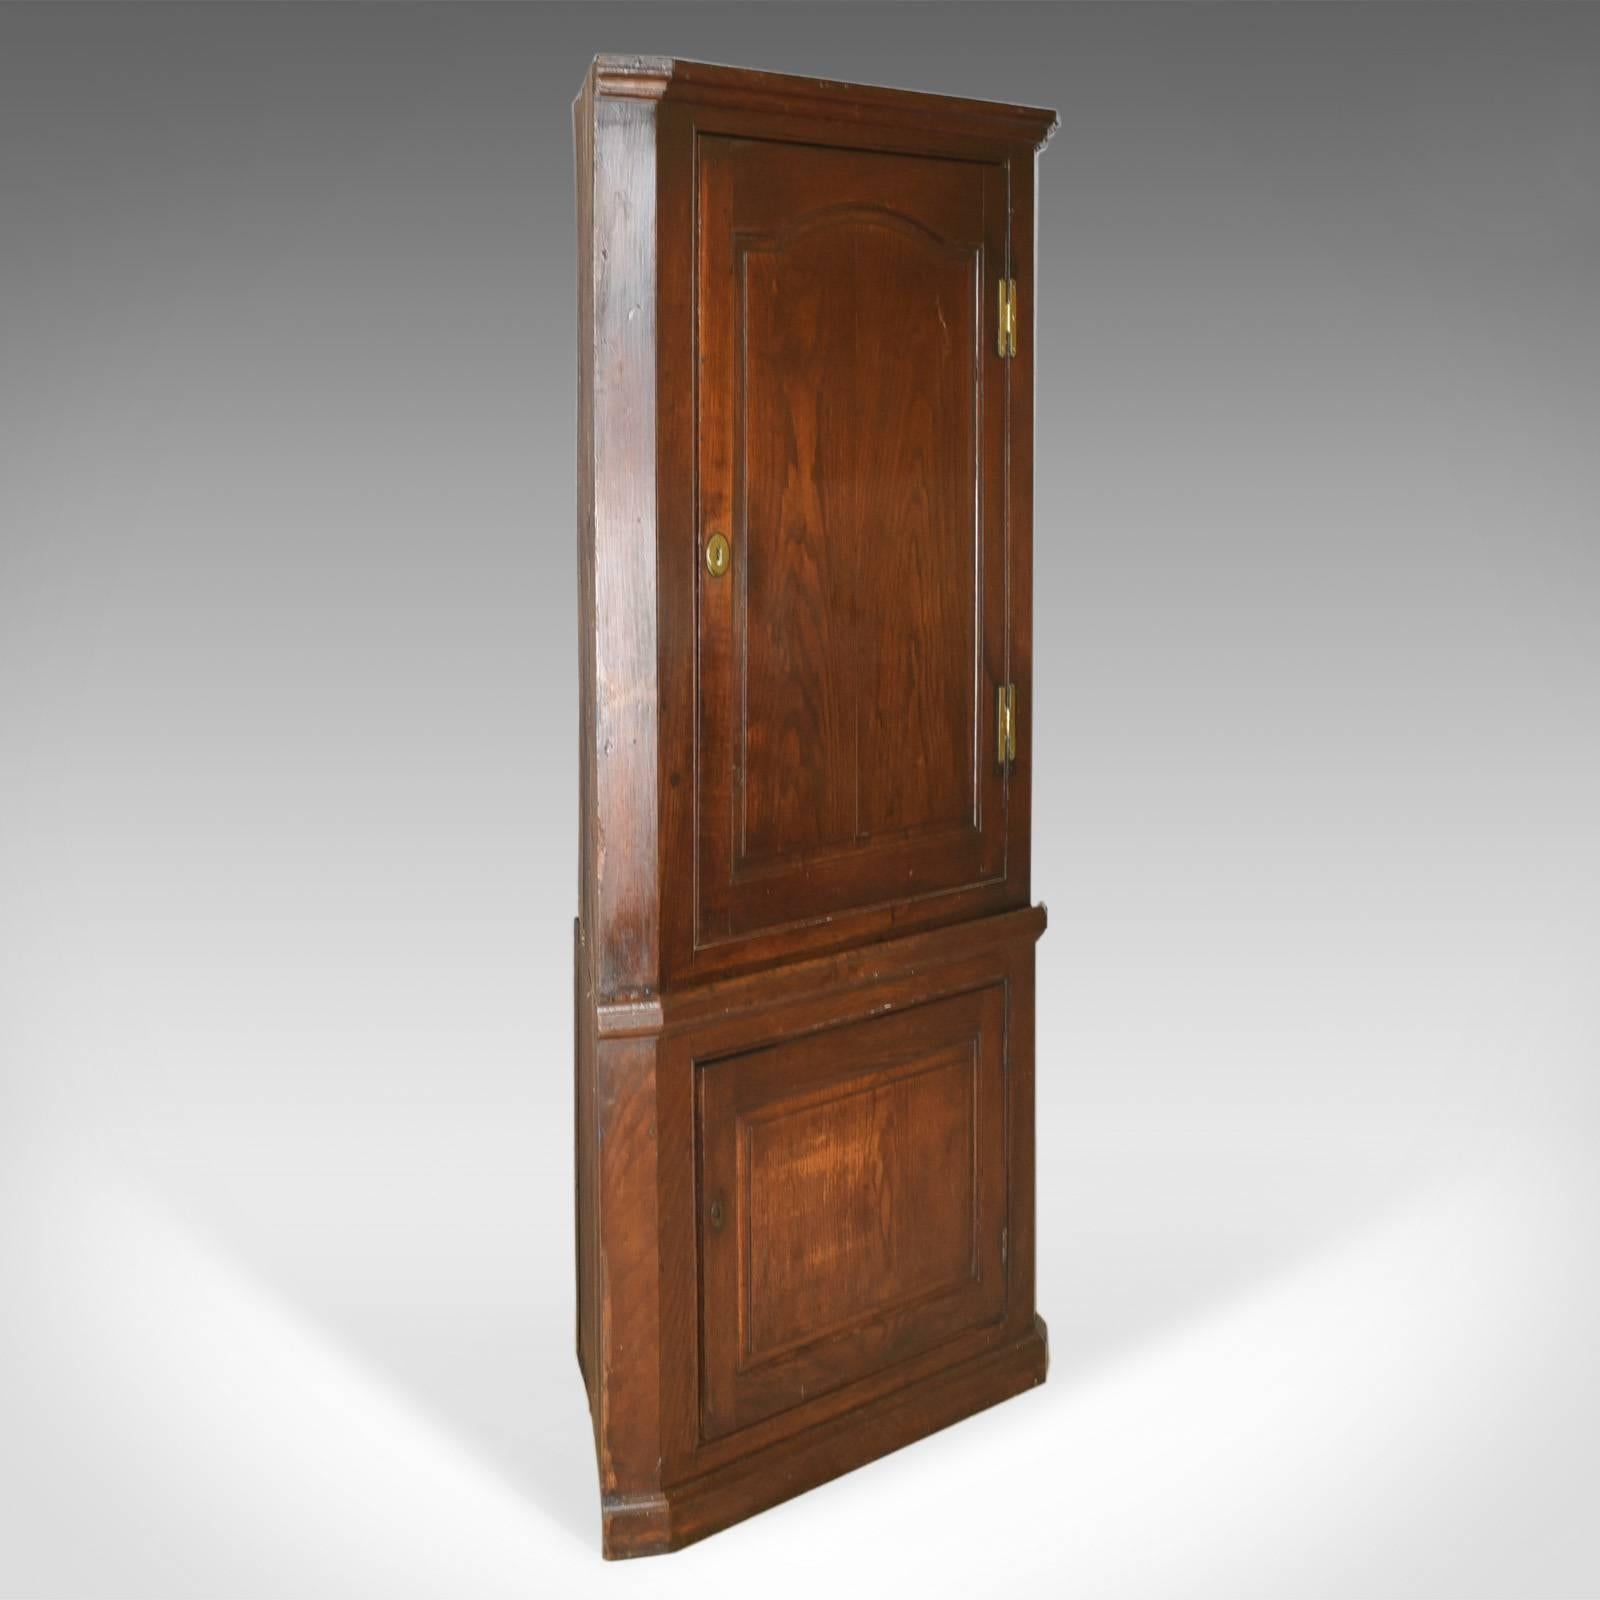 This is an antique corner cabinet, an English oak, late Georgian floor standing cupboard dating to circa 1800.

Attractive deep tones to the oak with fine, consistent color
Attractive grain interest prominent through the wax polished